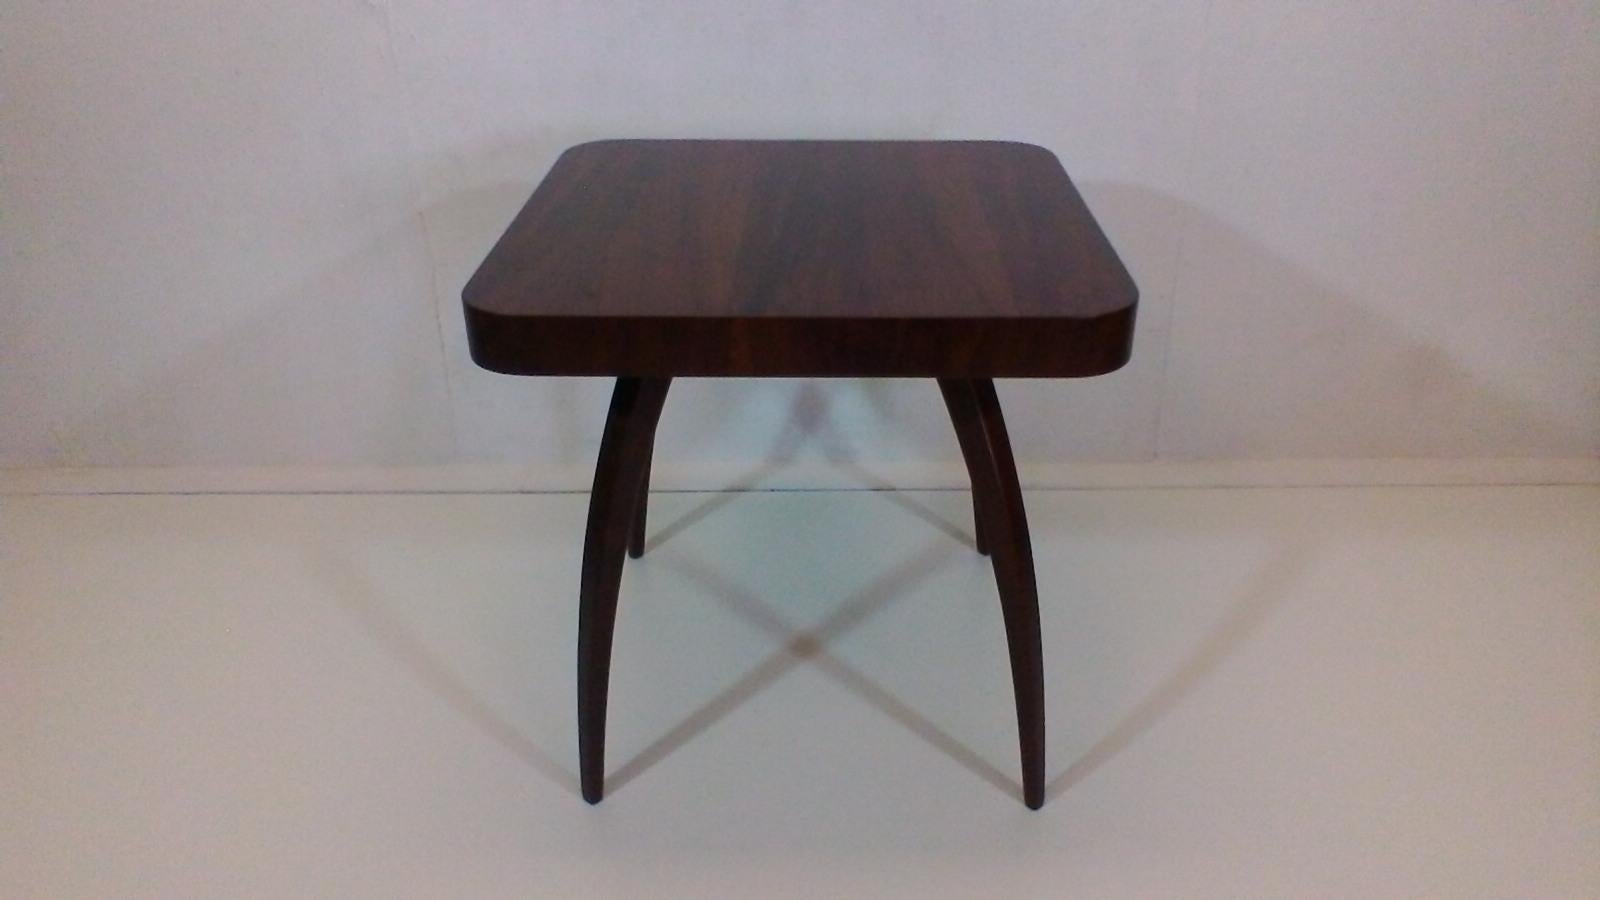 Made in Czechoslovakia. Wooden construction, top plate of veneer. The item is after complete renovation, it has high quality polyurethane varnish.